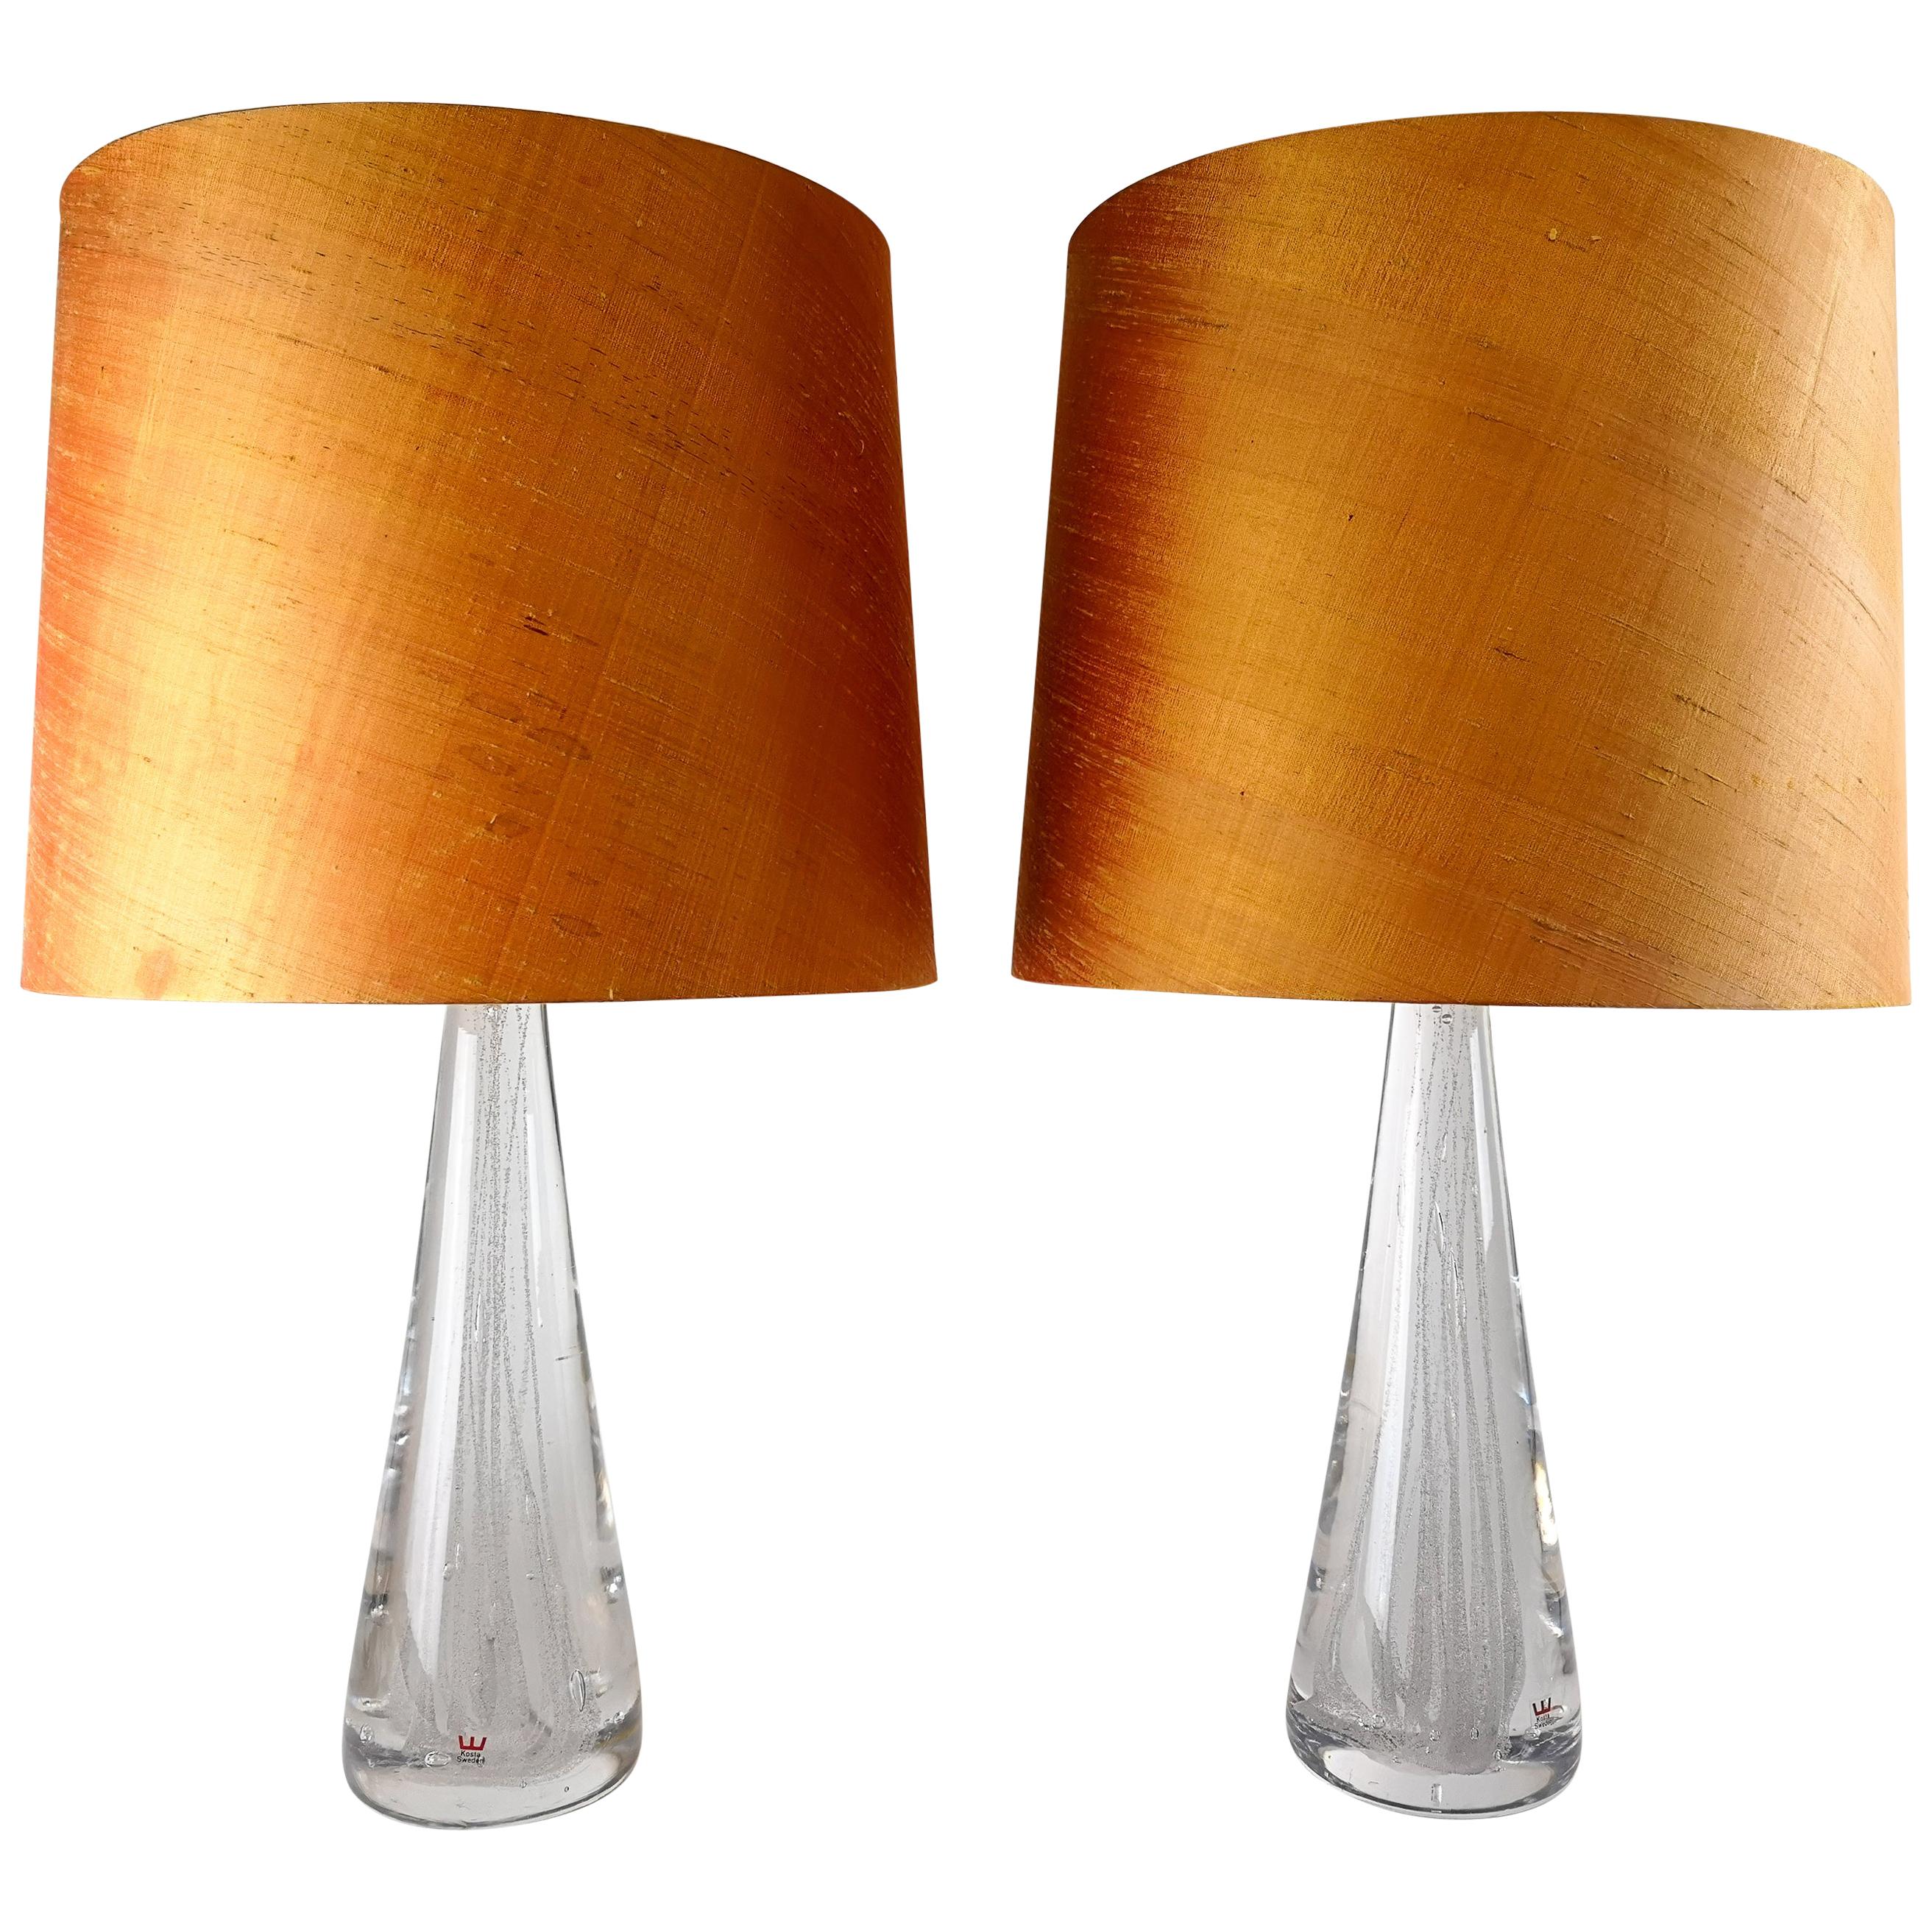 Midcentury Pair of Crystal Glass Table Lamps by Vicke Lindstrand